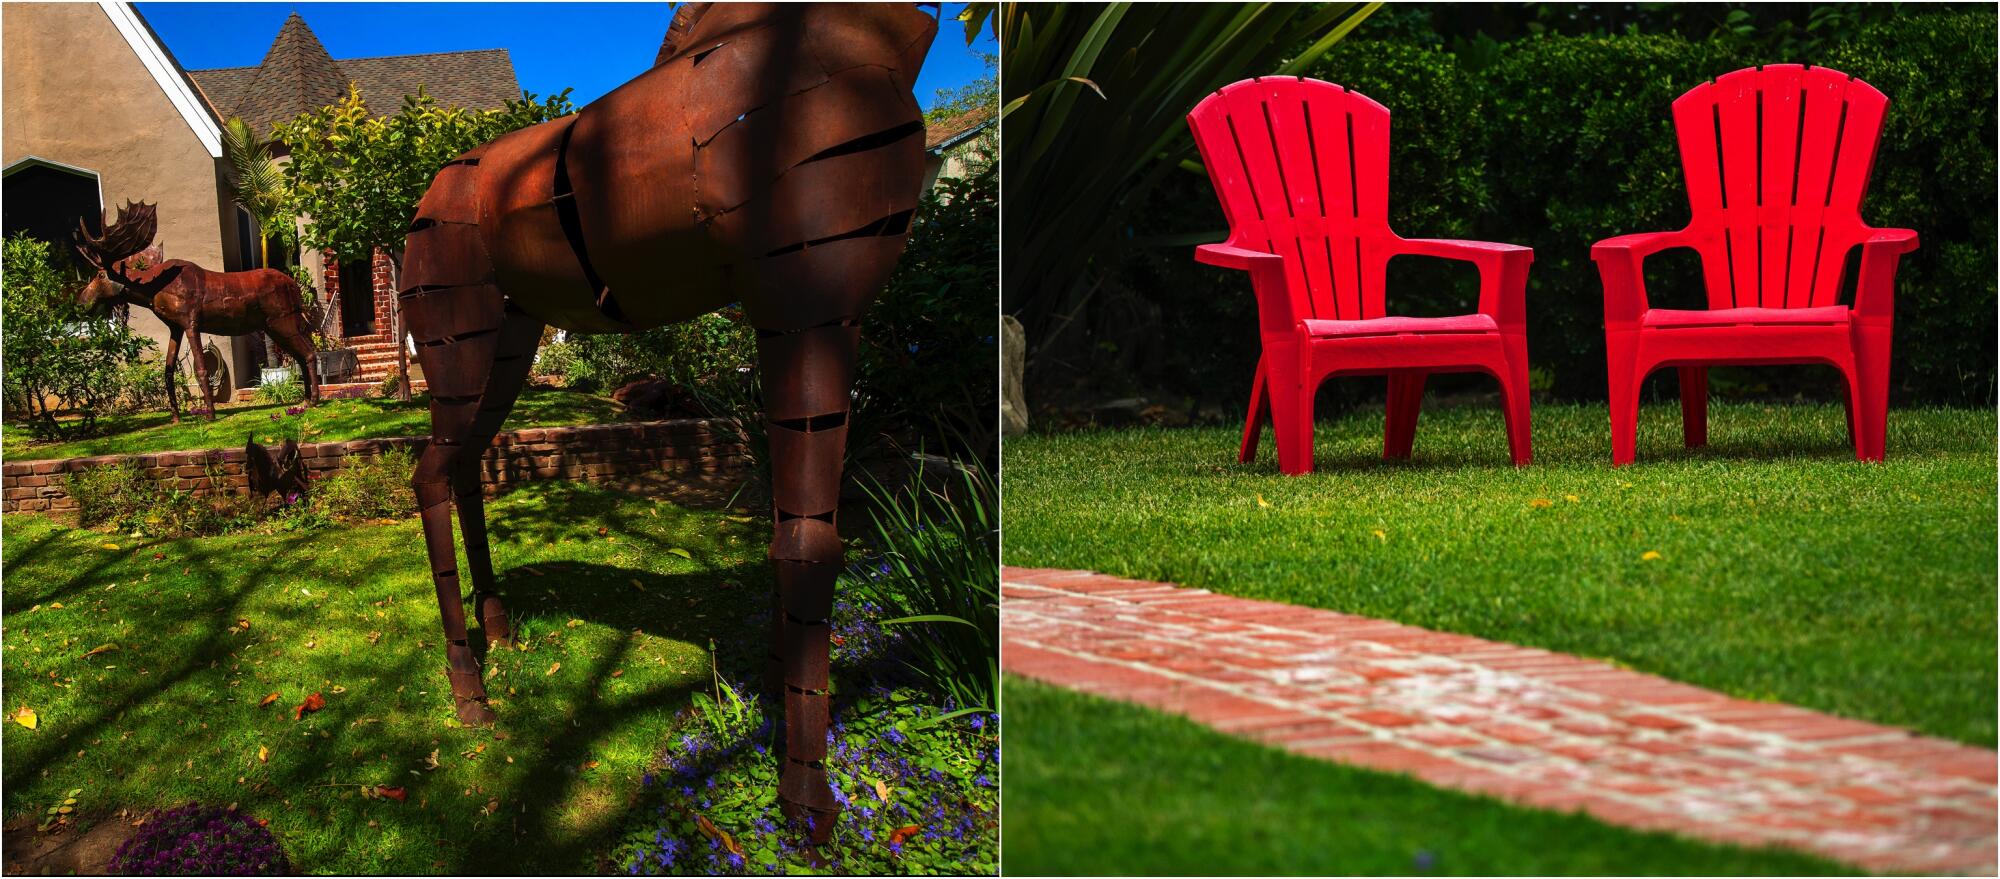 At left, animal sculptures on a lawn. At right, red chairs on a lawn.